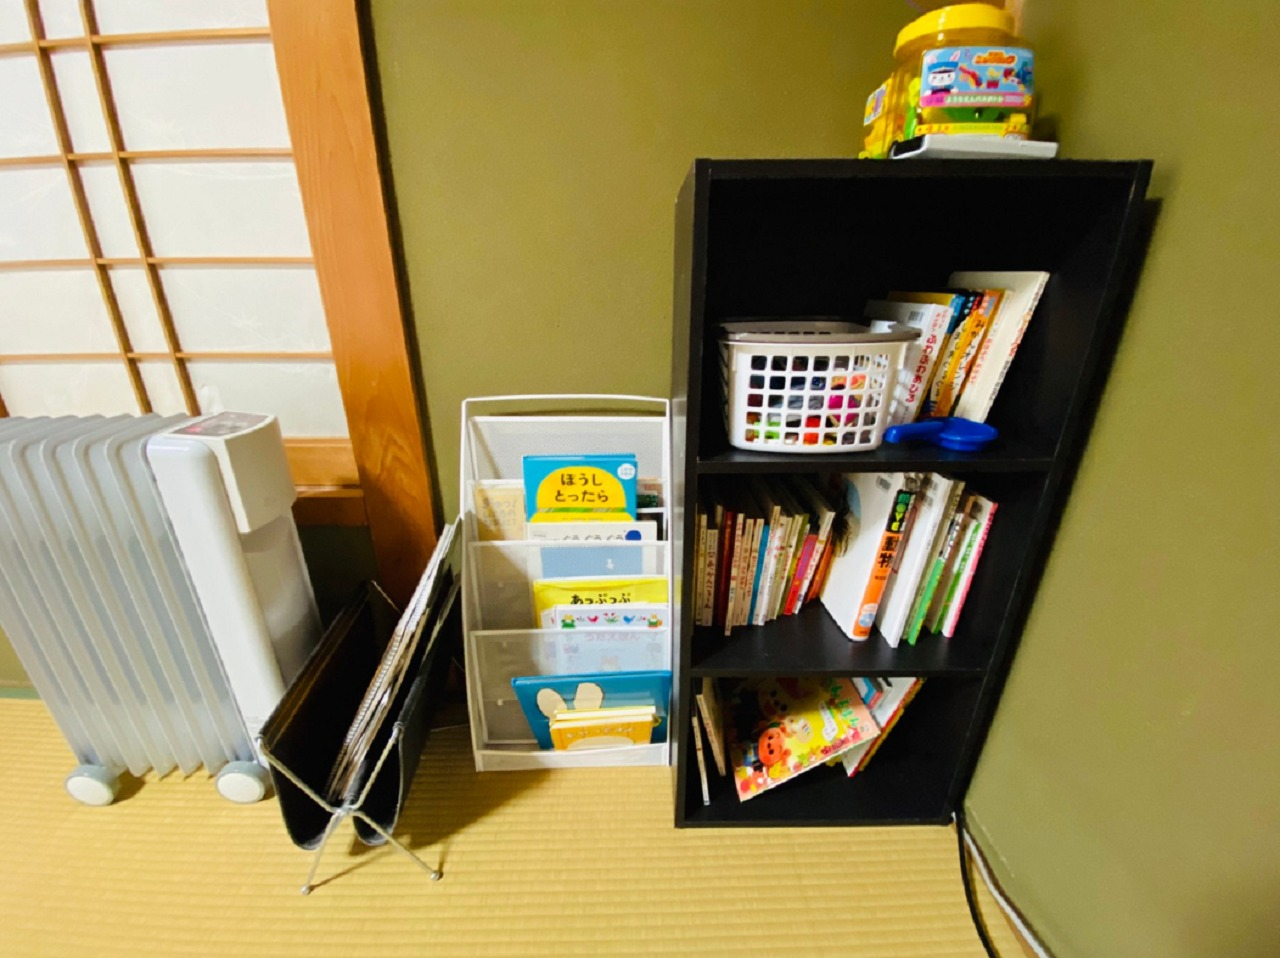 Children’s books are provided in house. 施設内にはお子様の本があります。